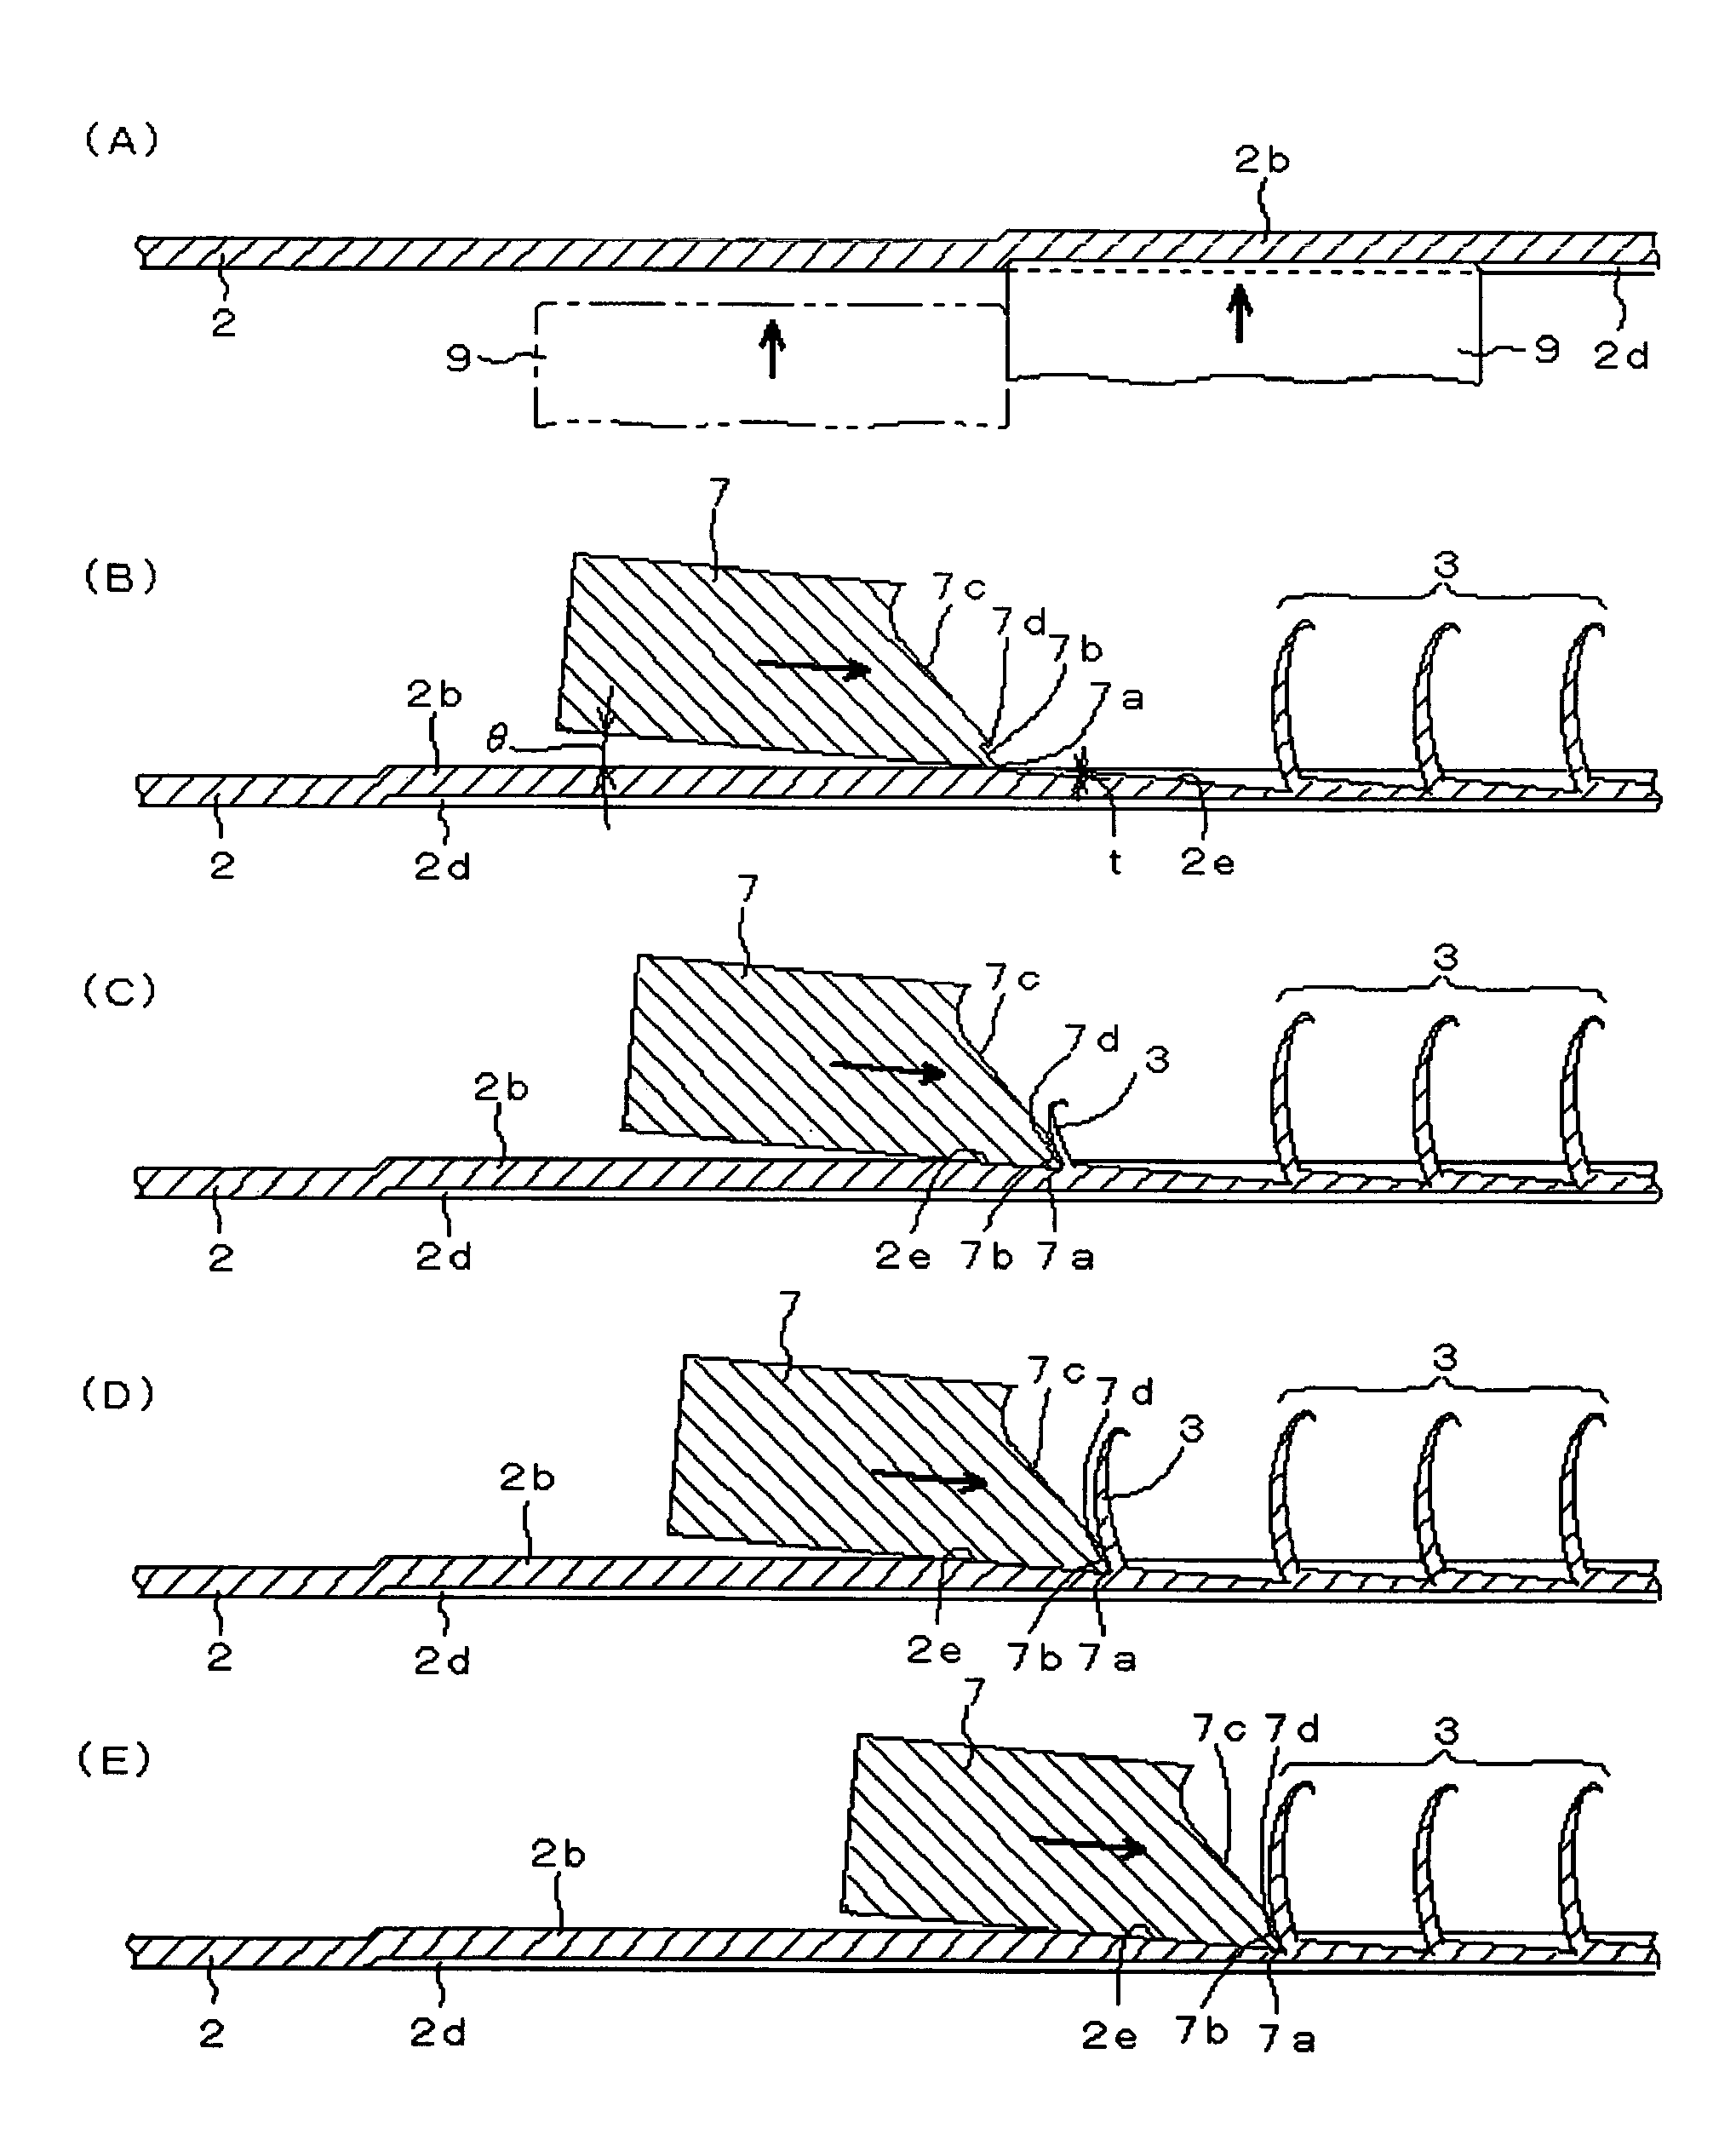 Radiator and method of manufacturing the same